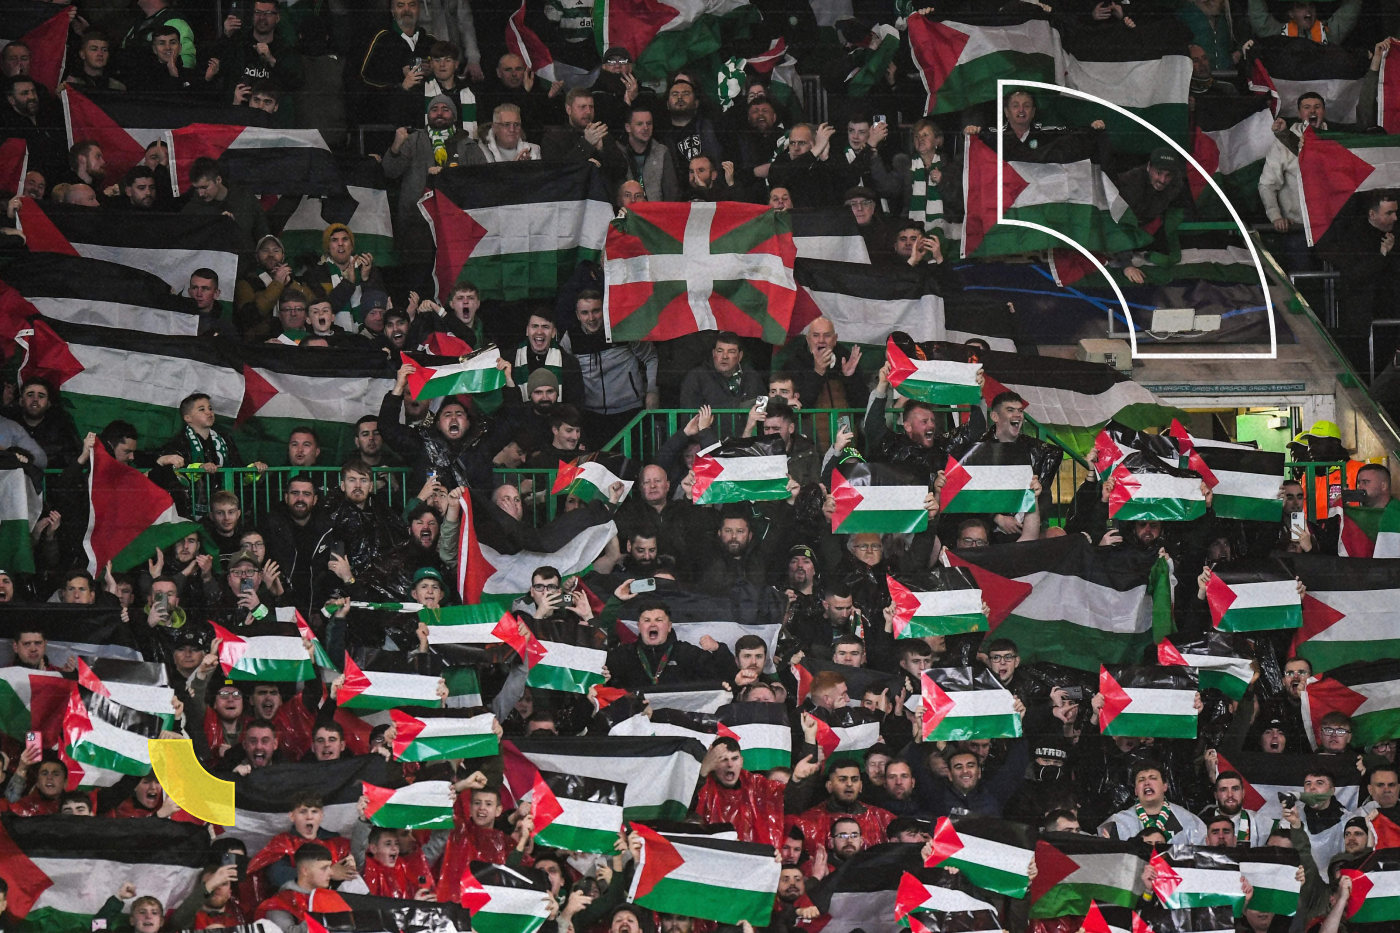 Supporters hold Palestinian flags as they cheer prior to the start of the UEFA Champions League group E football match between Celtic and Atletico Madrid at Celtic Park stadium in Glasgow, Scotland, on October 25, 2023. (Photo by ANDY BUCHANAN / AFP)